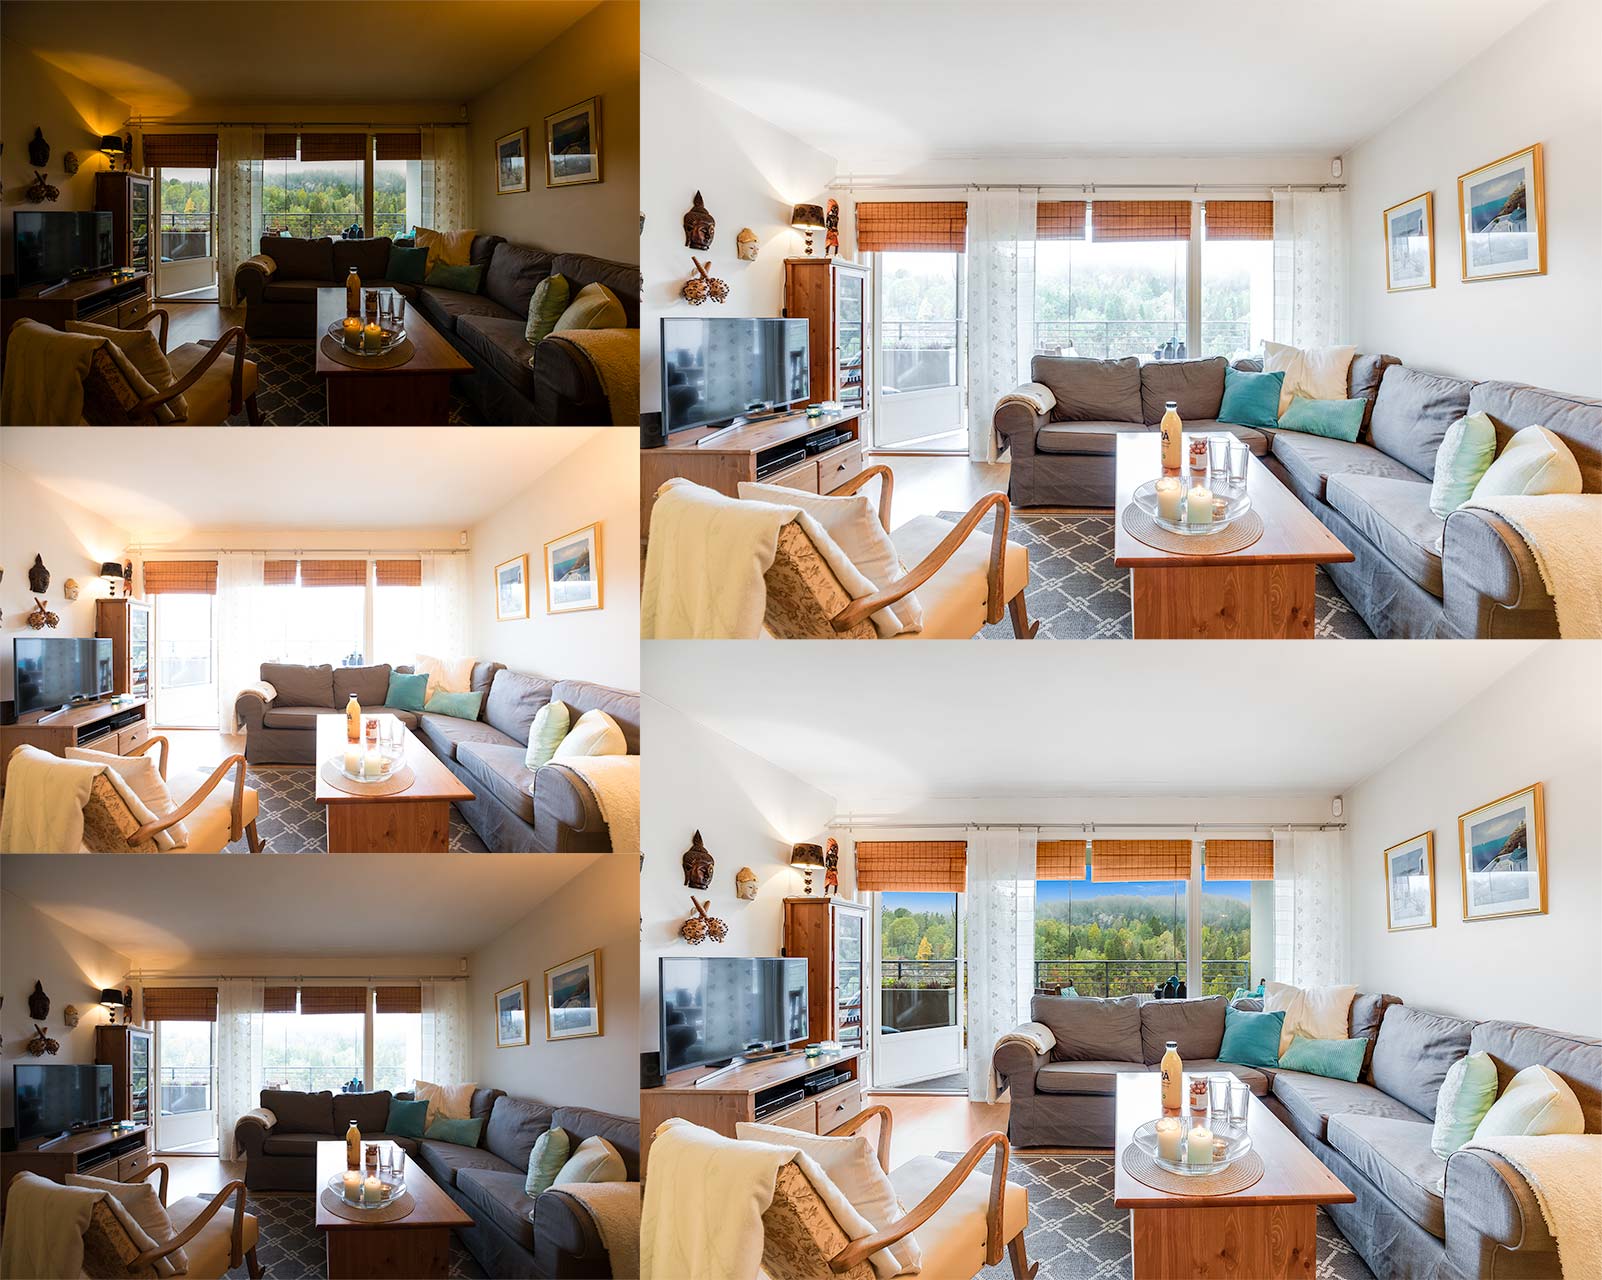 Get To Know These Real Estate Photography Editing Terms